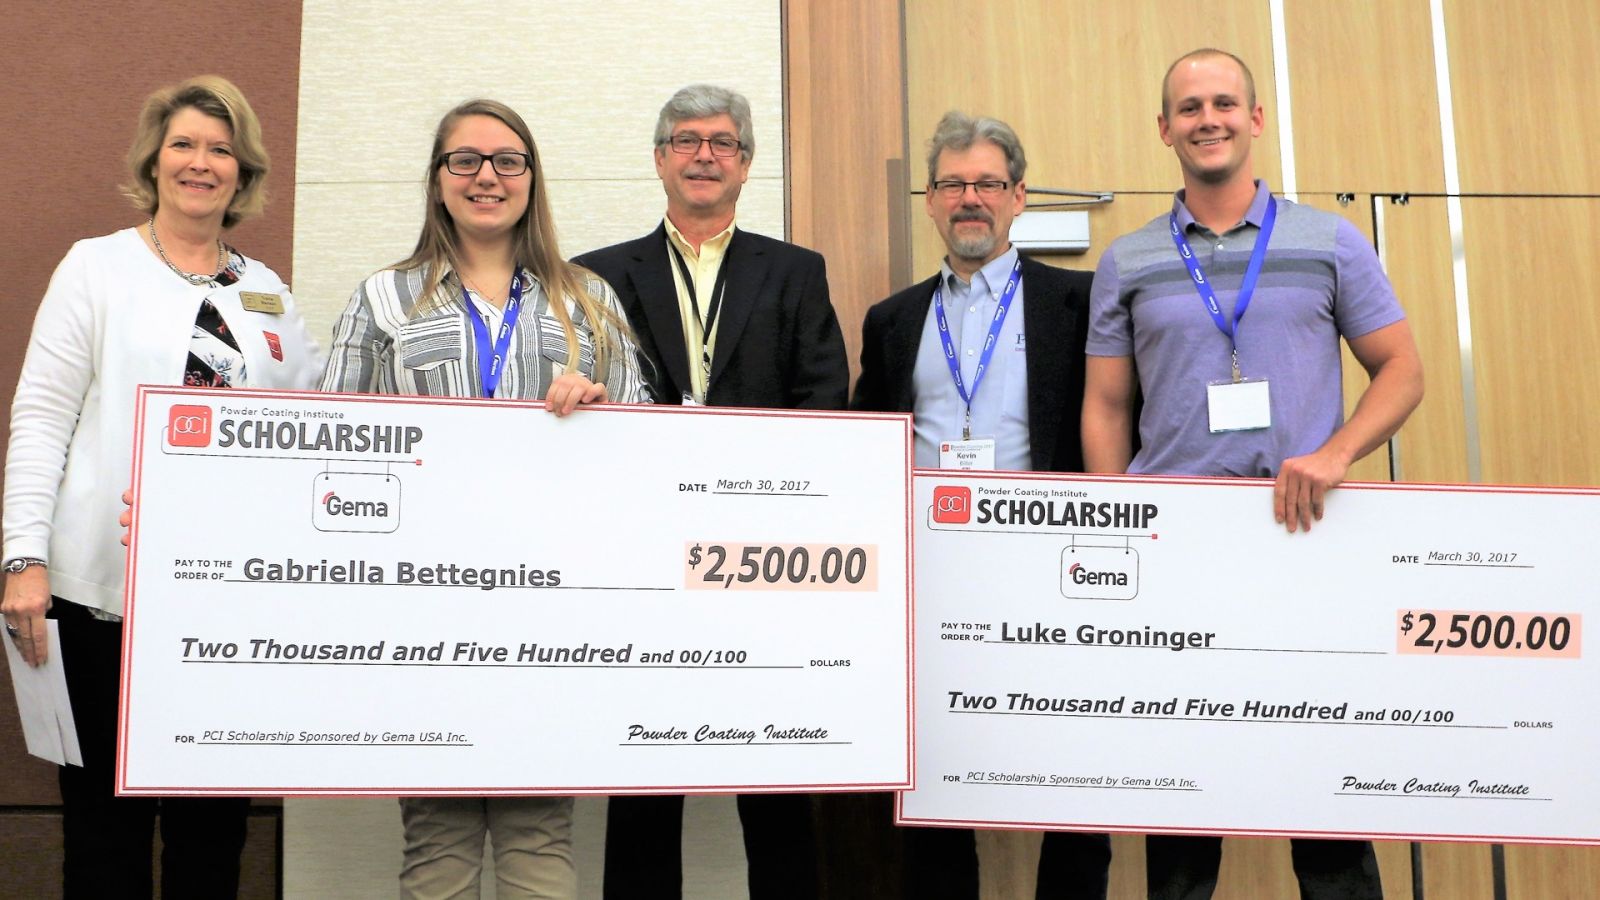 Trena Benson, executive director of PCI, Chris Merritt, and Kevin Biller, chair of PCI Future of Technology subcommittee, present the PCI/Gema scholarship awards to Gabriella Bettegnies and Luke Groninger.